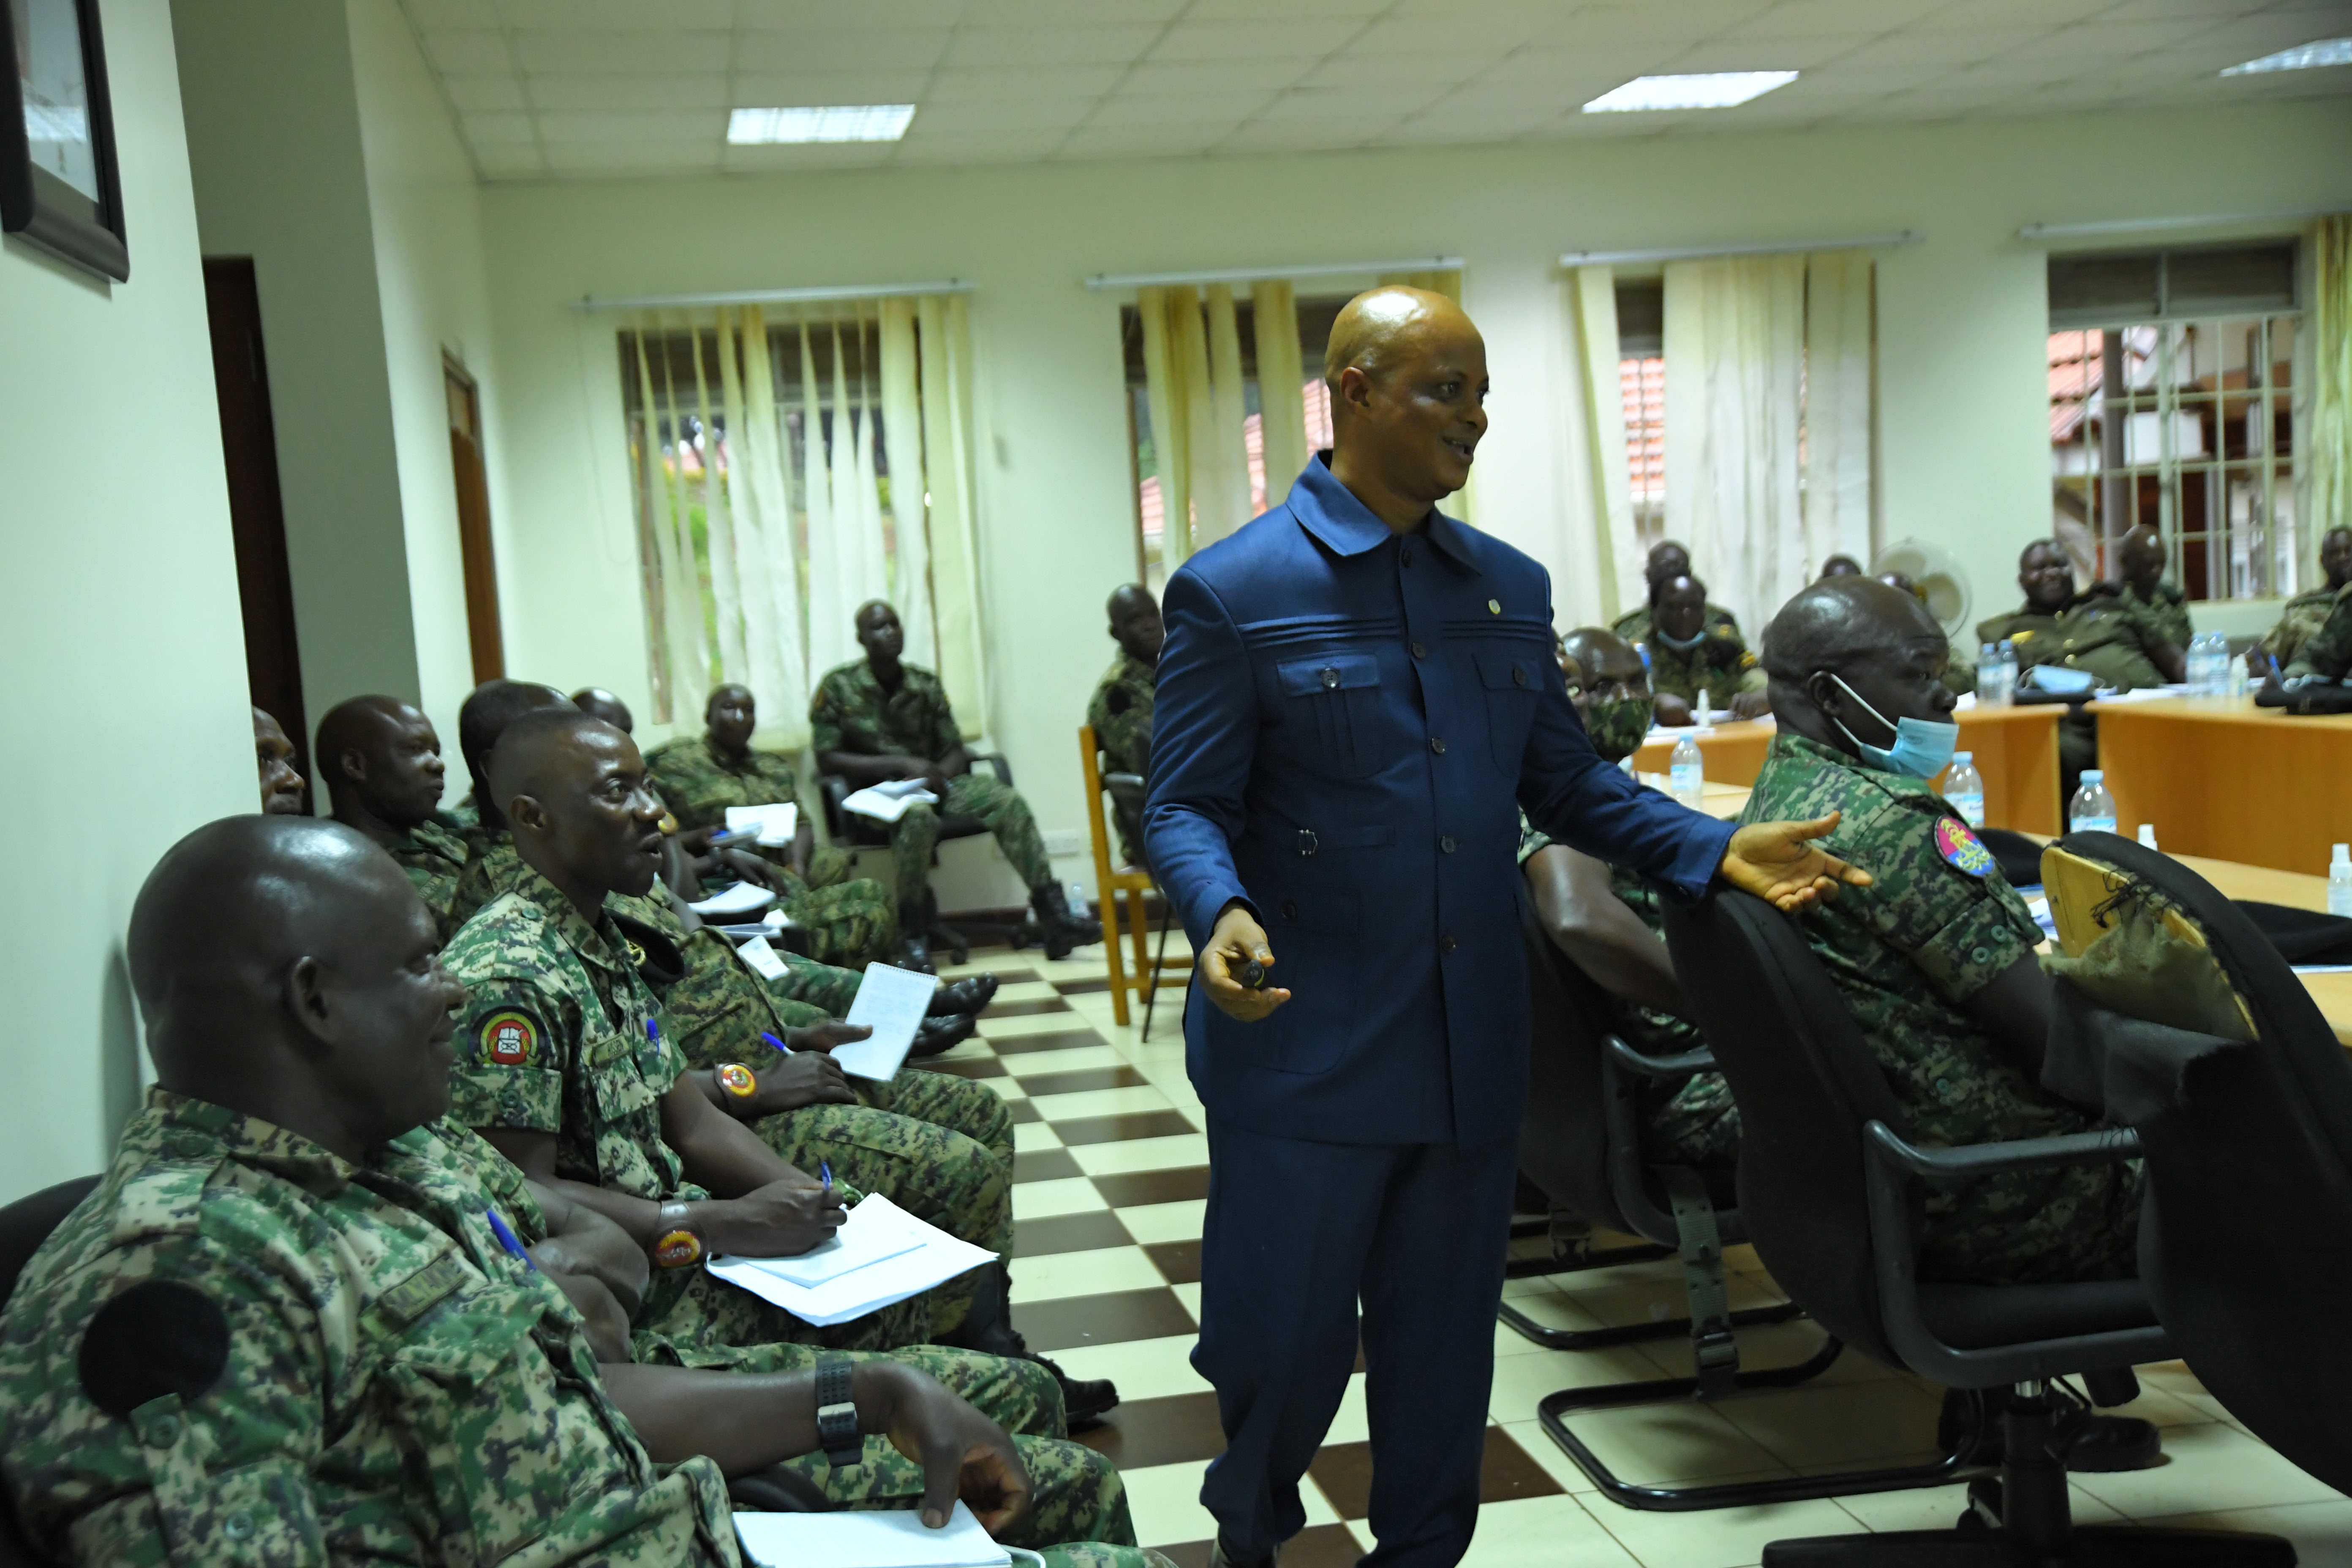 Emmanuel Momoh, interacts with Senior Officers of UPDF during a human rights training session at the Uganda Rapid Deployment Capability Centre (URDCC) in Jinja